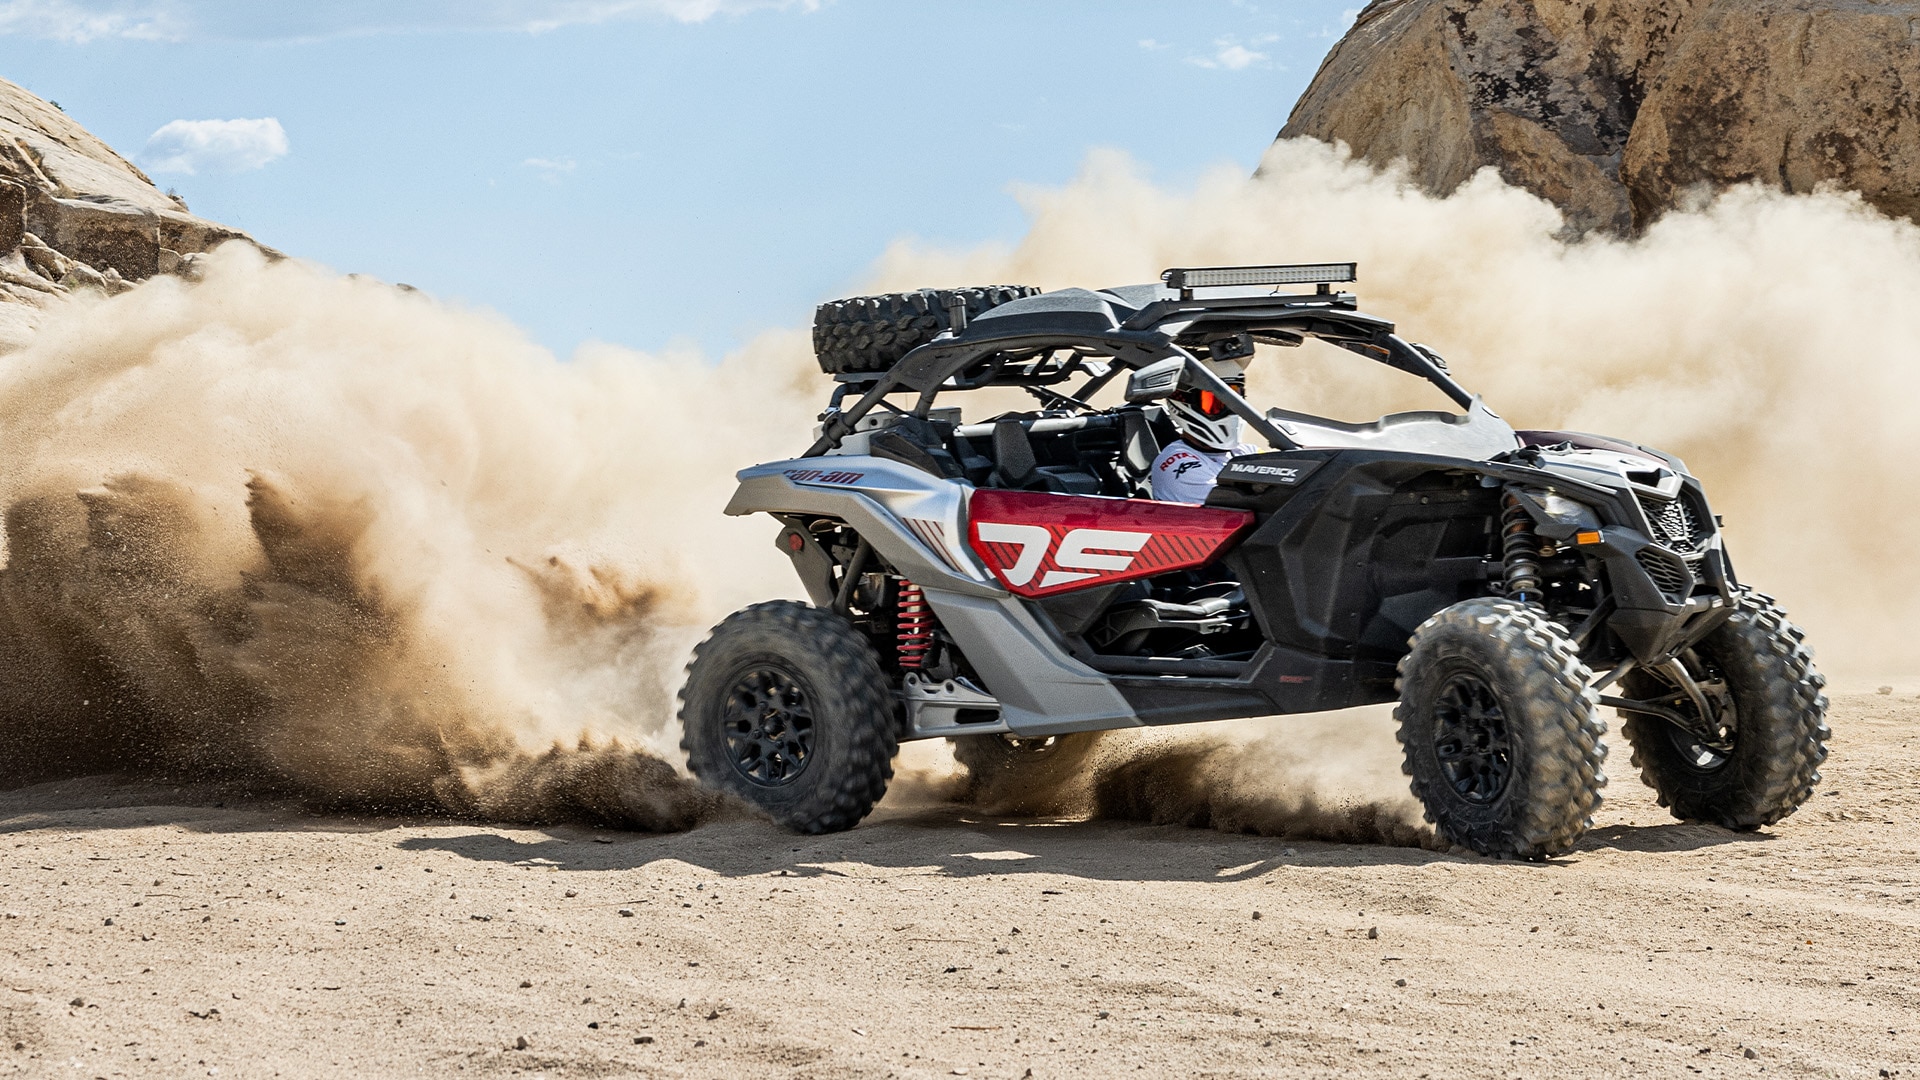 Rider in Can-Am Maverick X3 ripping around the desert and kicking up dust clouds 